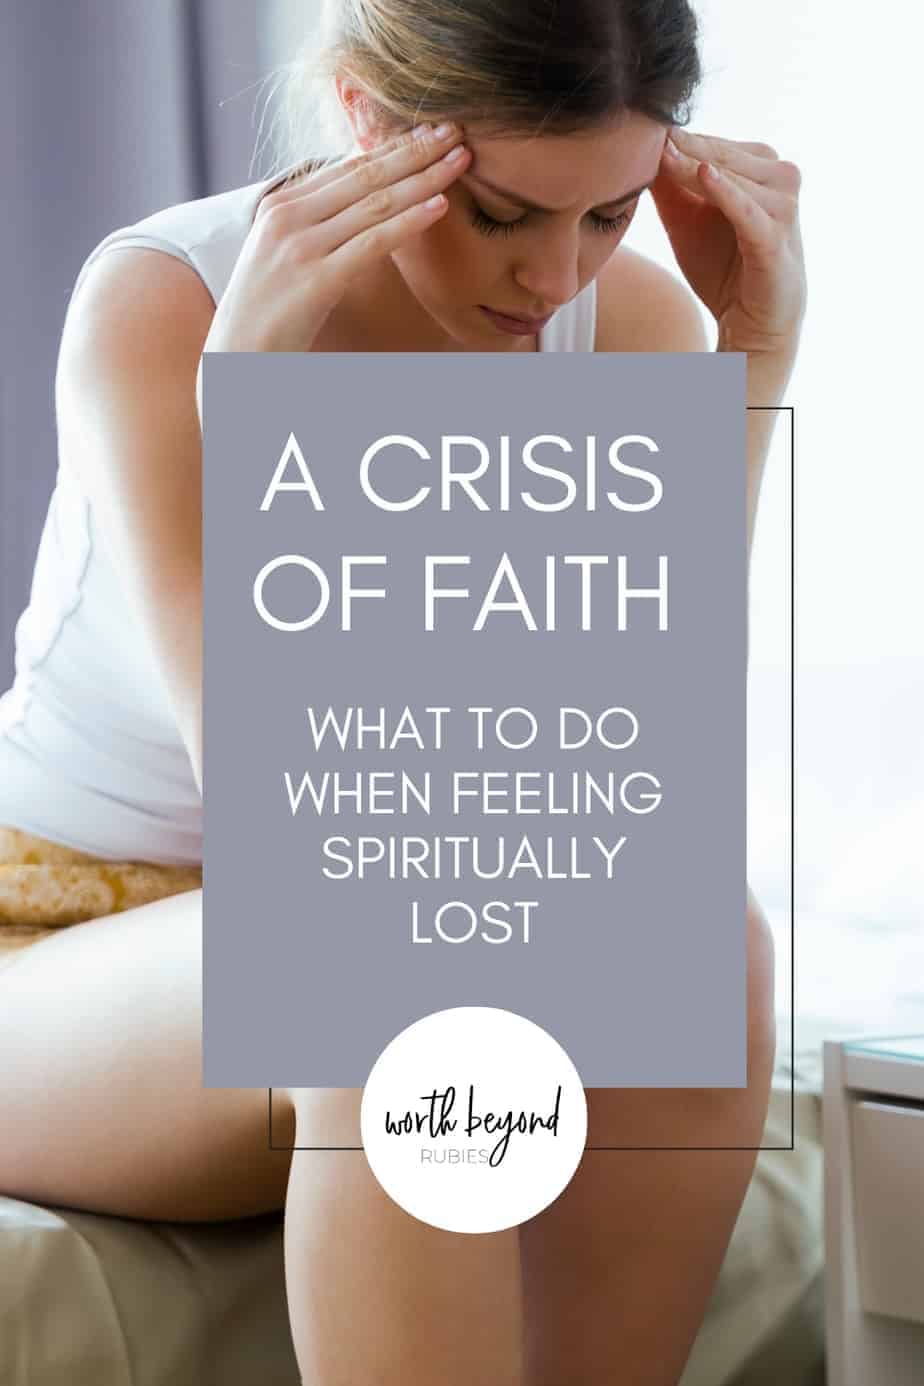 Unhappy lonely depressed woman sitting on bed and text overlay that says "A Crisis of Faith - What to Do When Feeling Spiritually Lost"